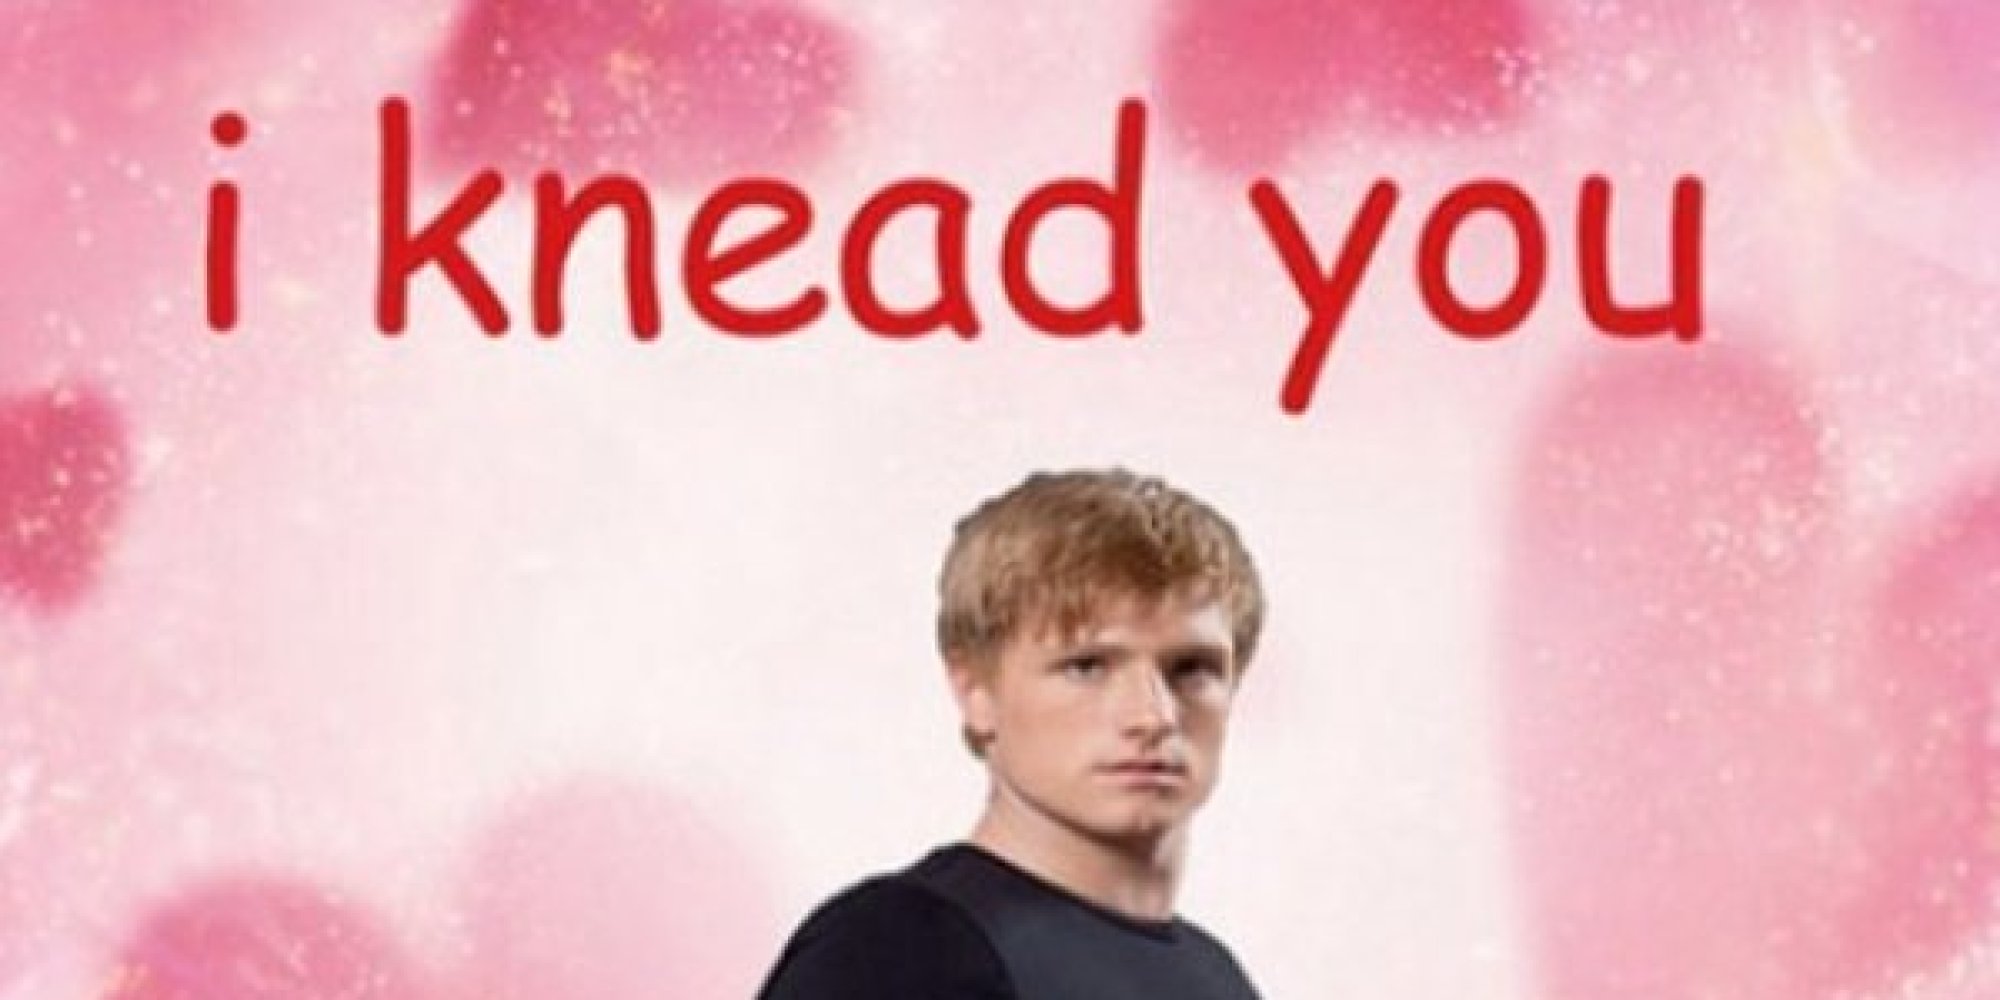 Celebrate Valentines Day Early With These Epic Cards From Tumblr